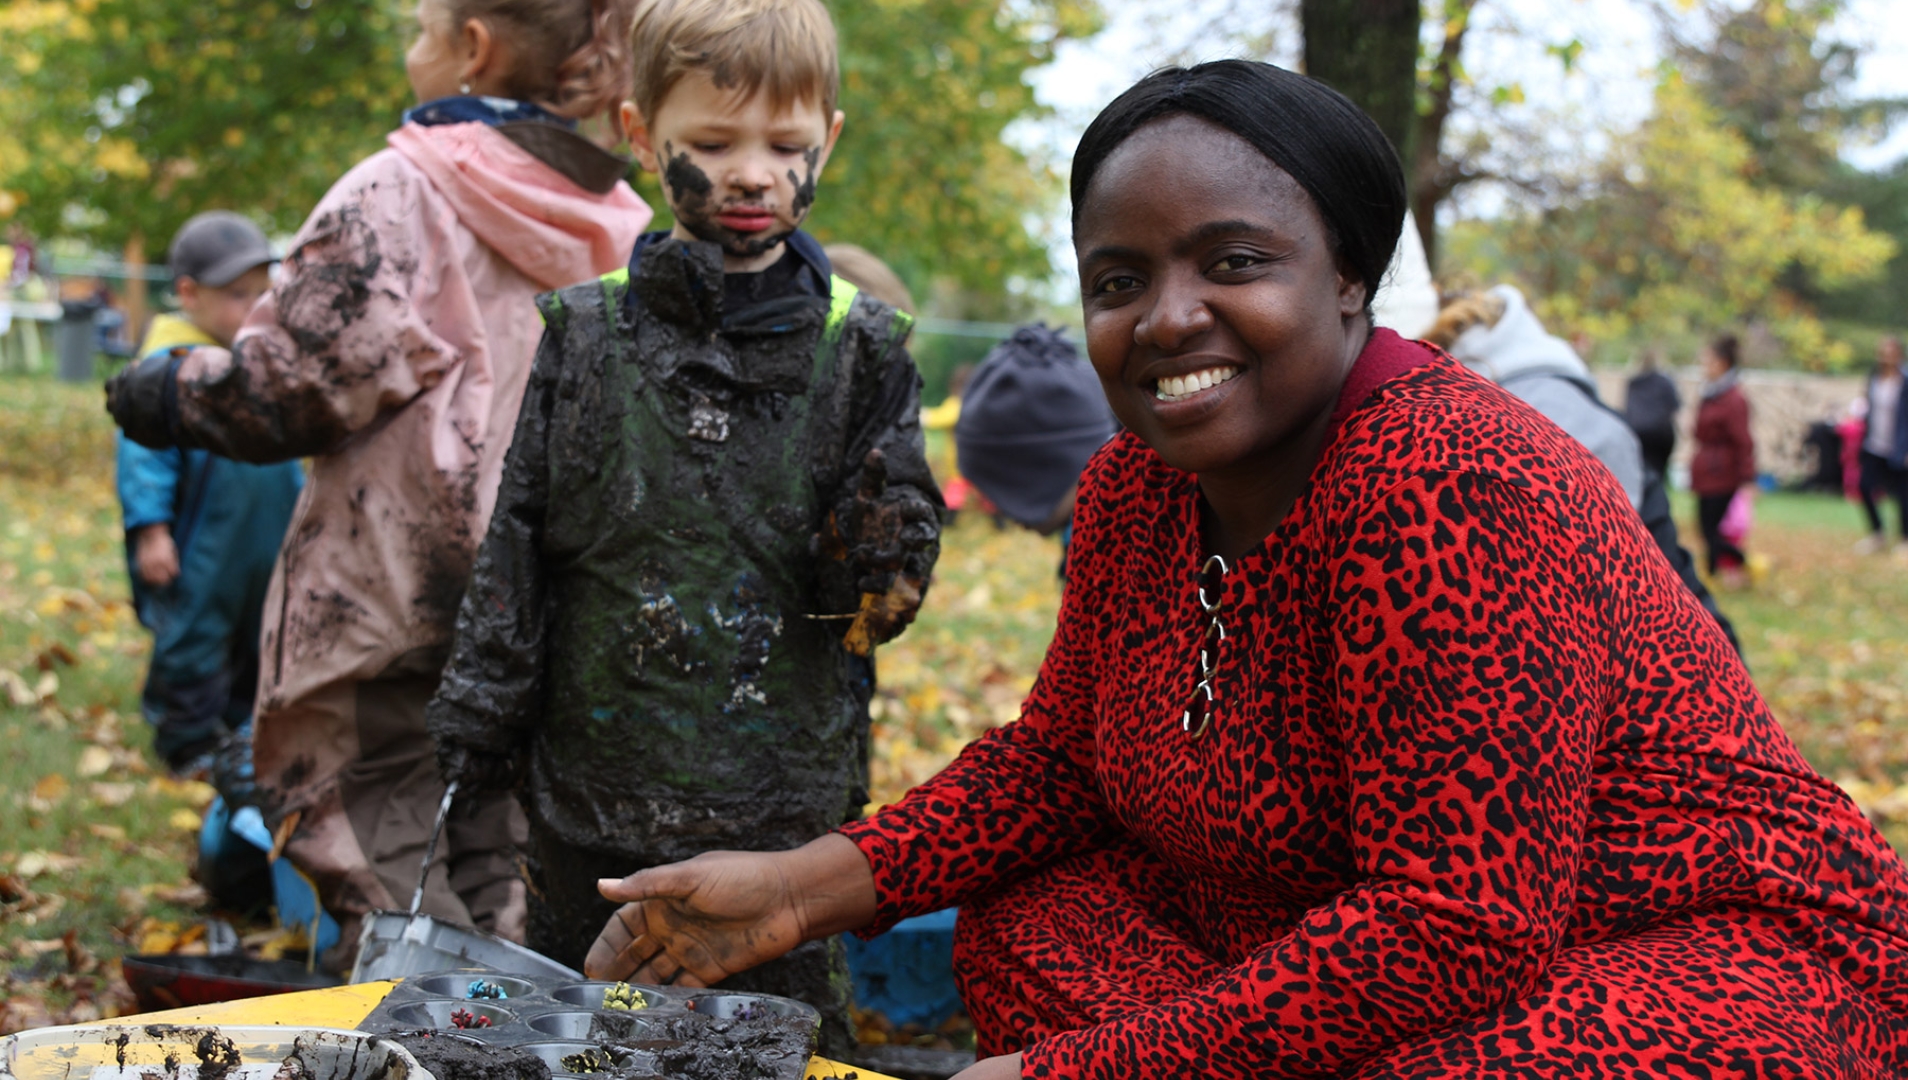 A smiling person in a red-and-black dress with a mud-covered child standing next to them and more children running in the background.